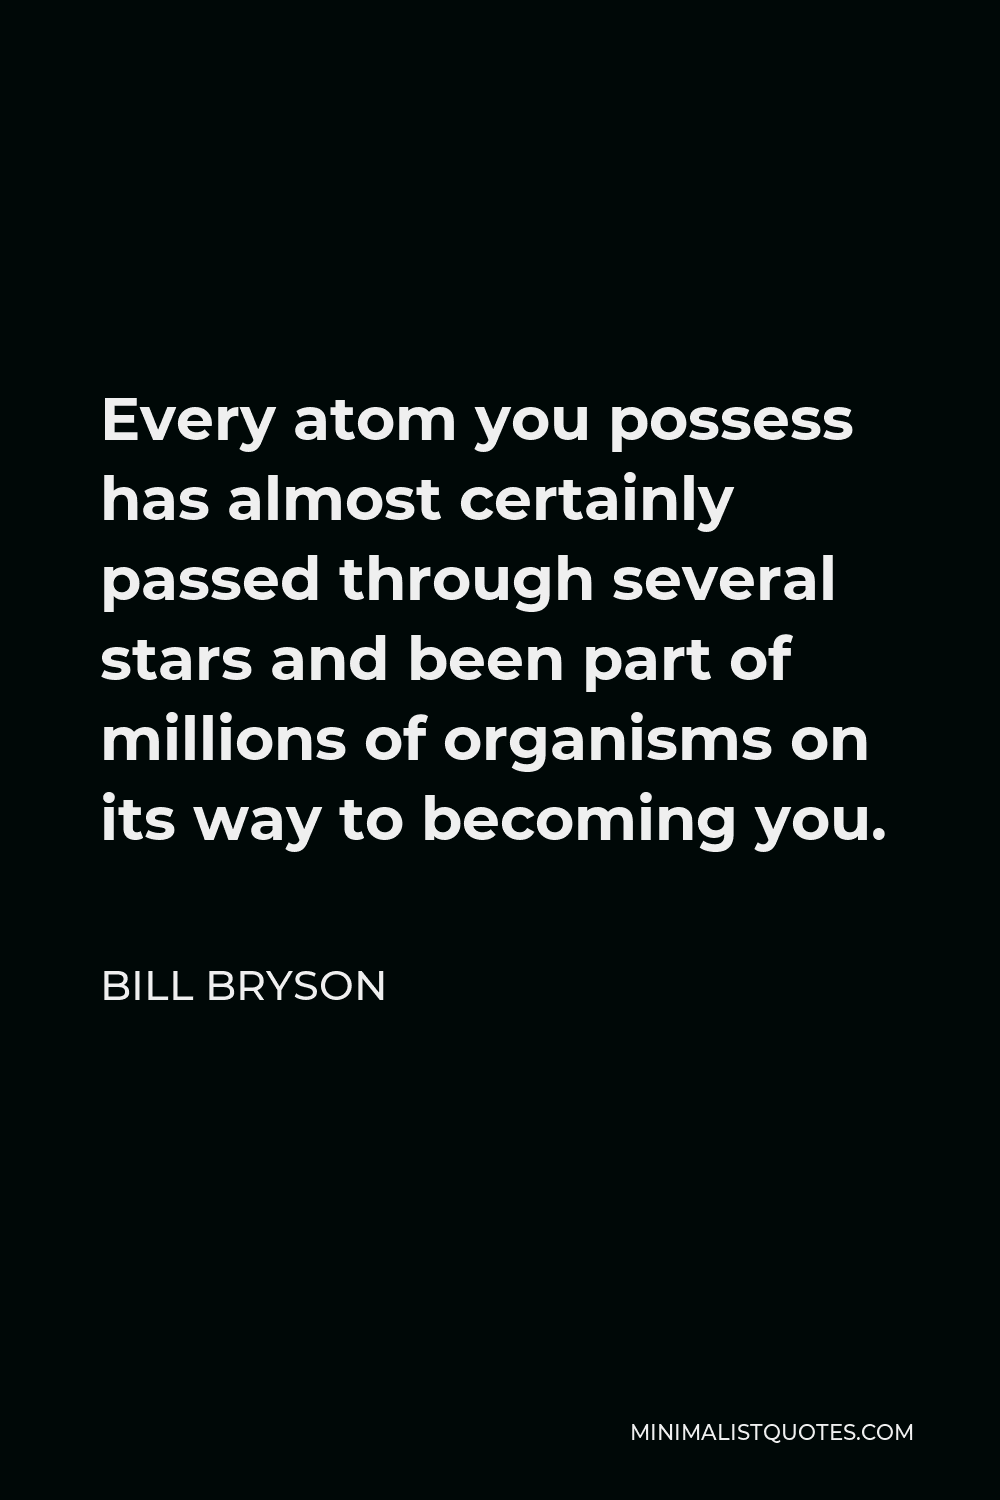 Bill Bryson Quote - Every atom you possess has almost certainly passed through several stars and been part of millions of organisms on its way to becoming you.